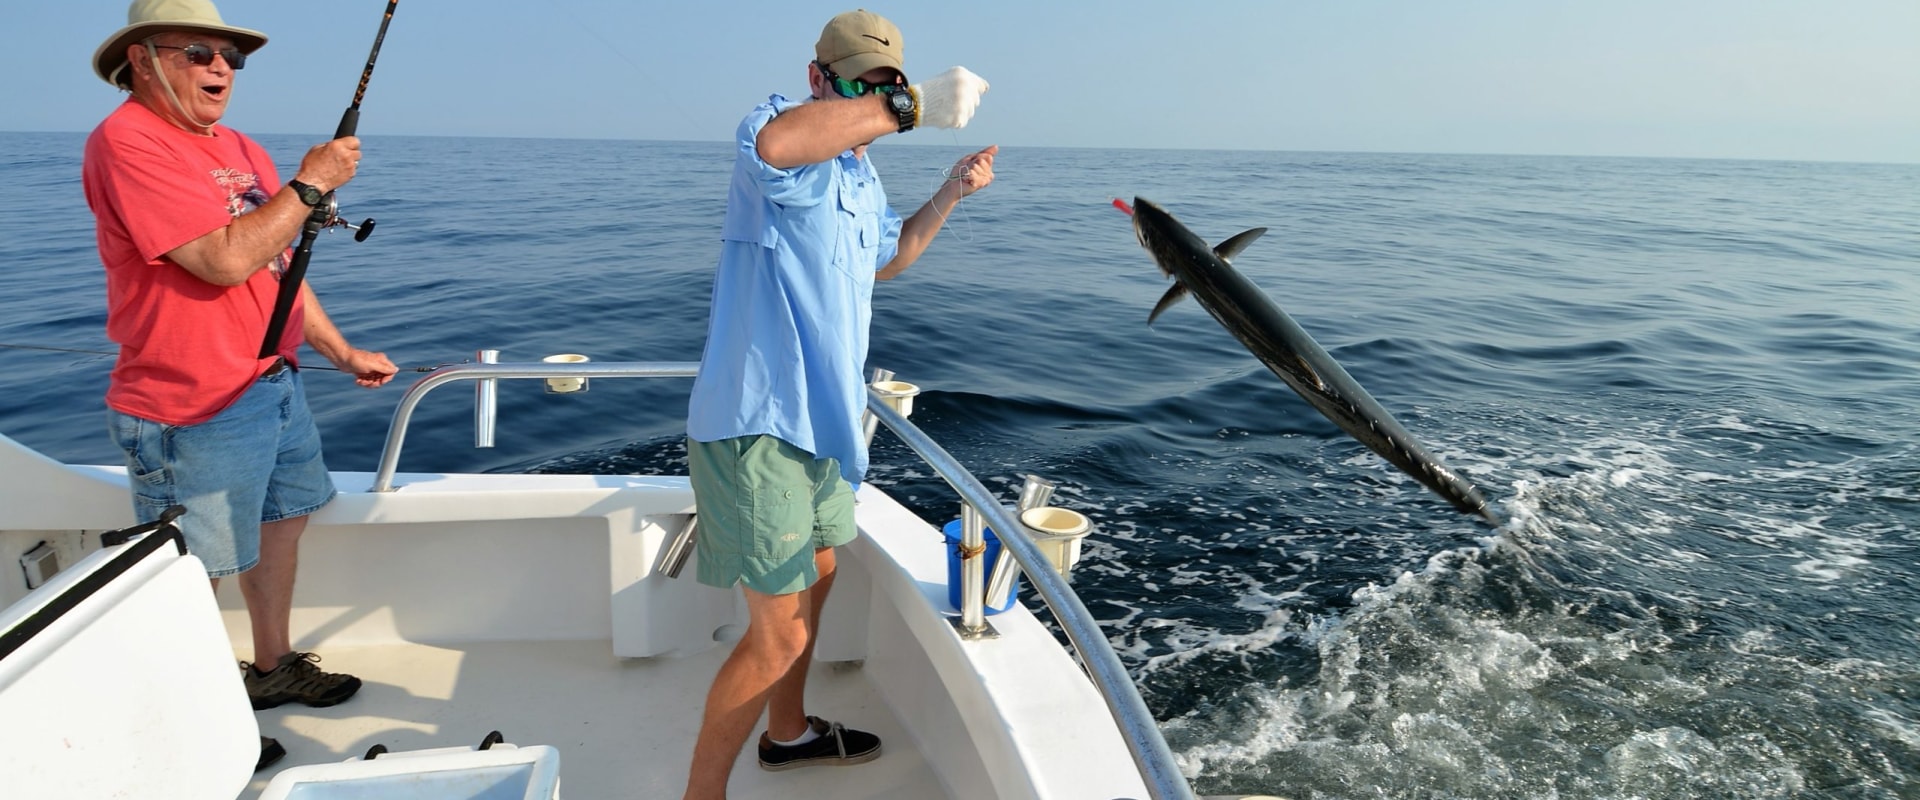 How do i prepare for a charter fishing trip?